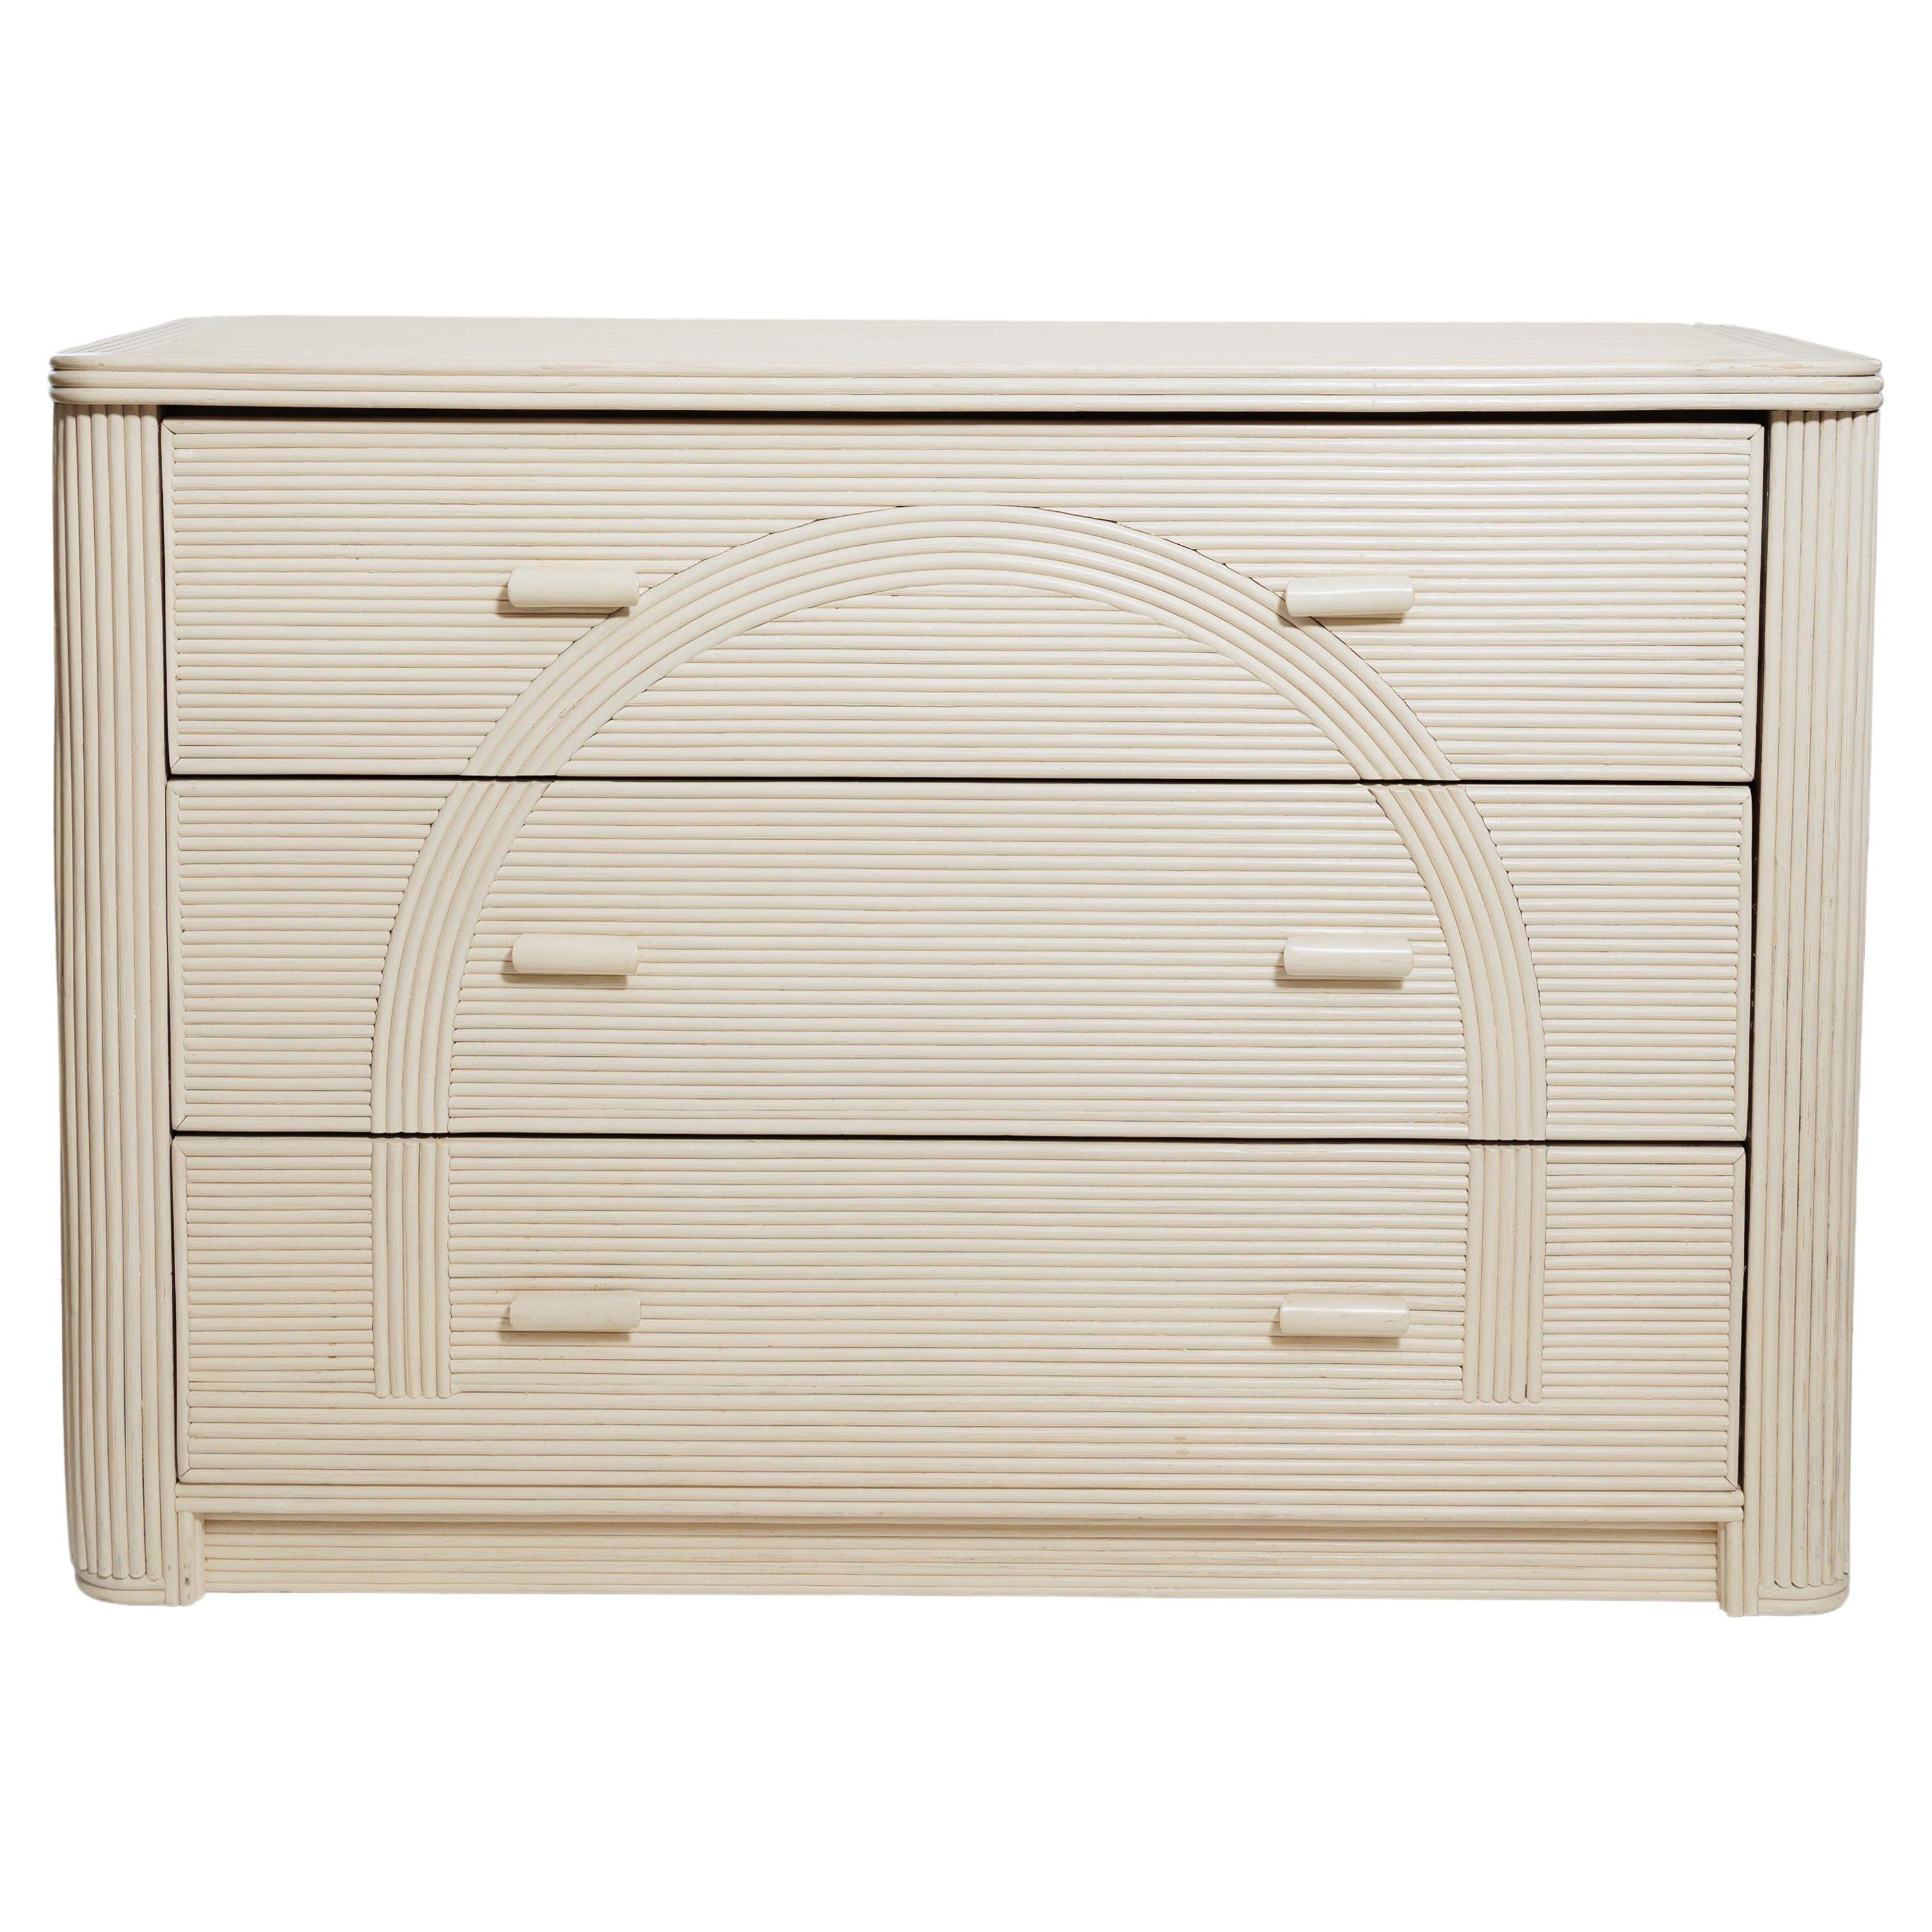 Pencil Reed Three Drawer Cabinet, Original Finish with "Arch" Design For Sale